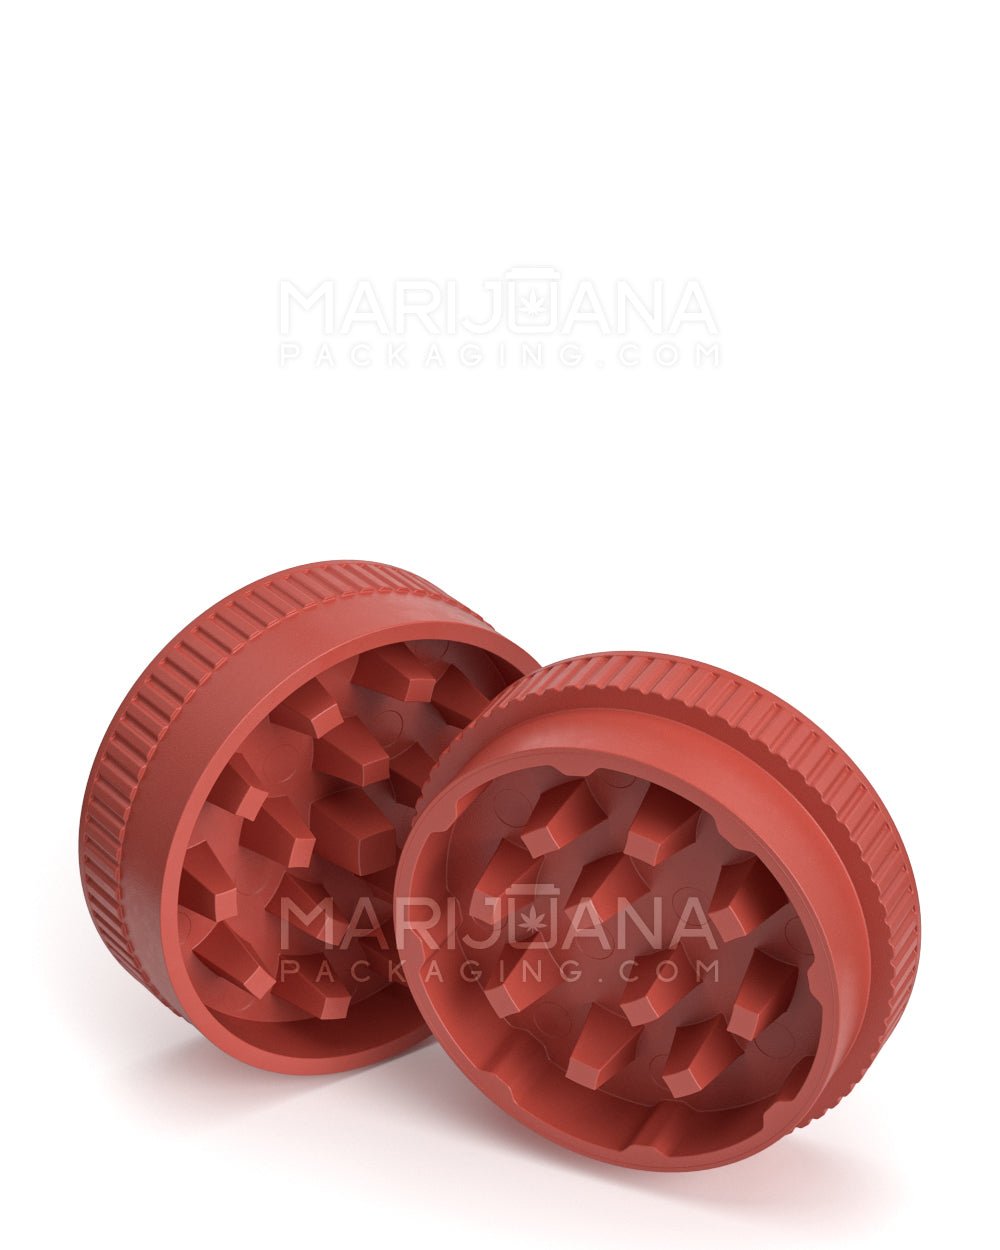 Biodegradable Thick Wall Red Grinder | 2 Piece - 55mm - 12 Count - 10